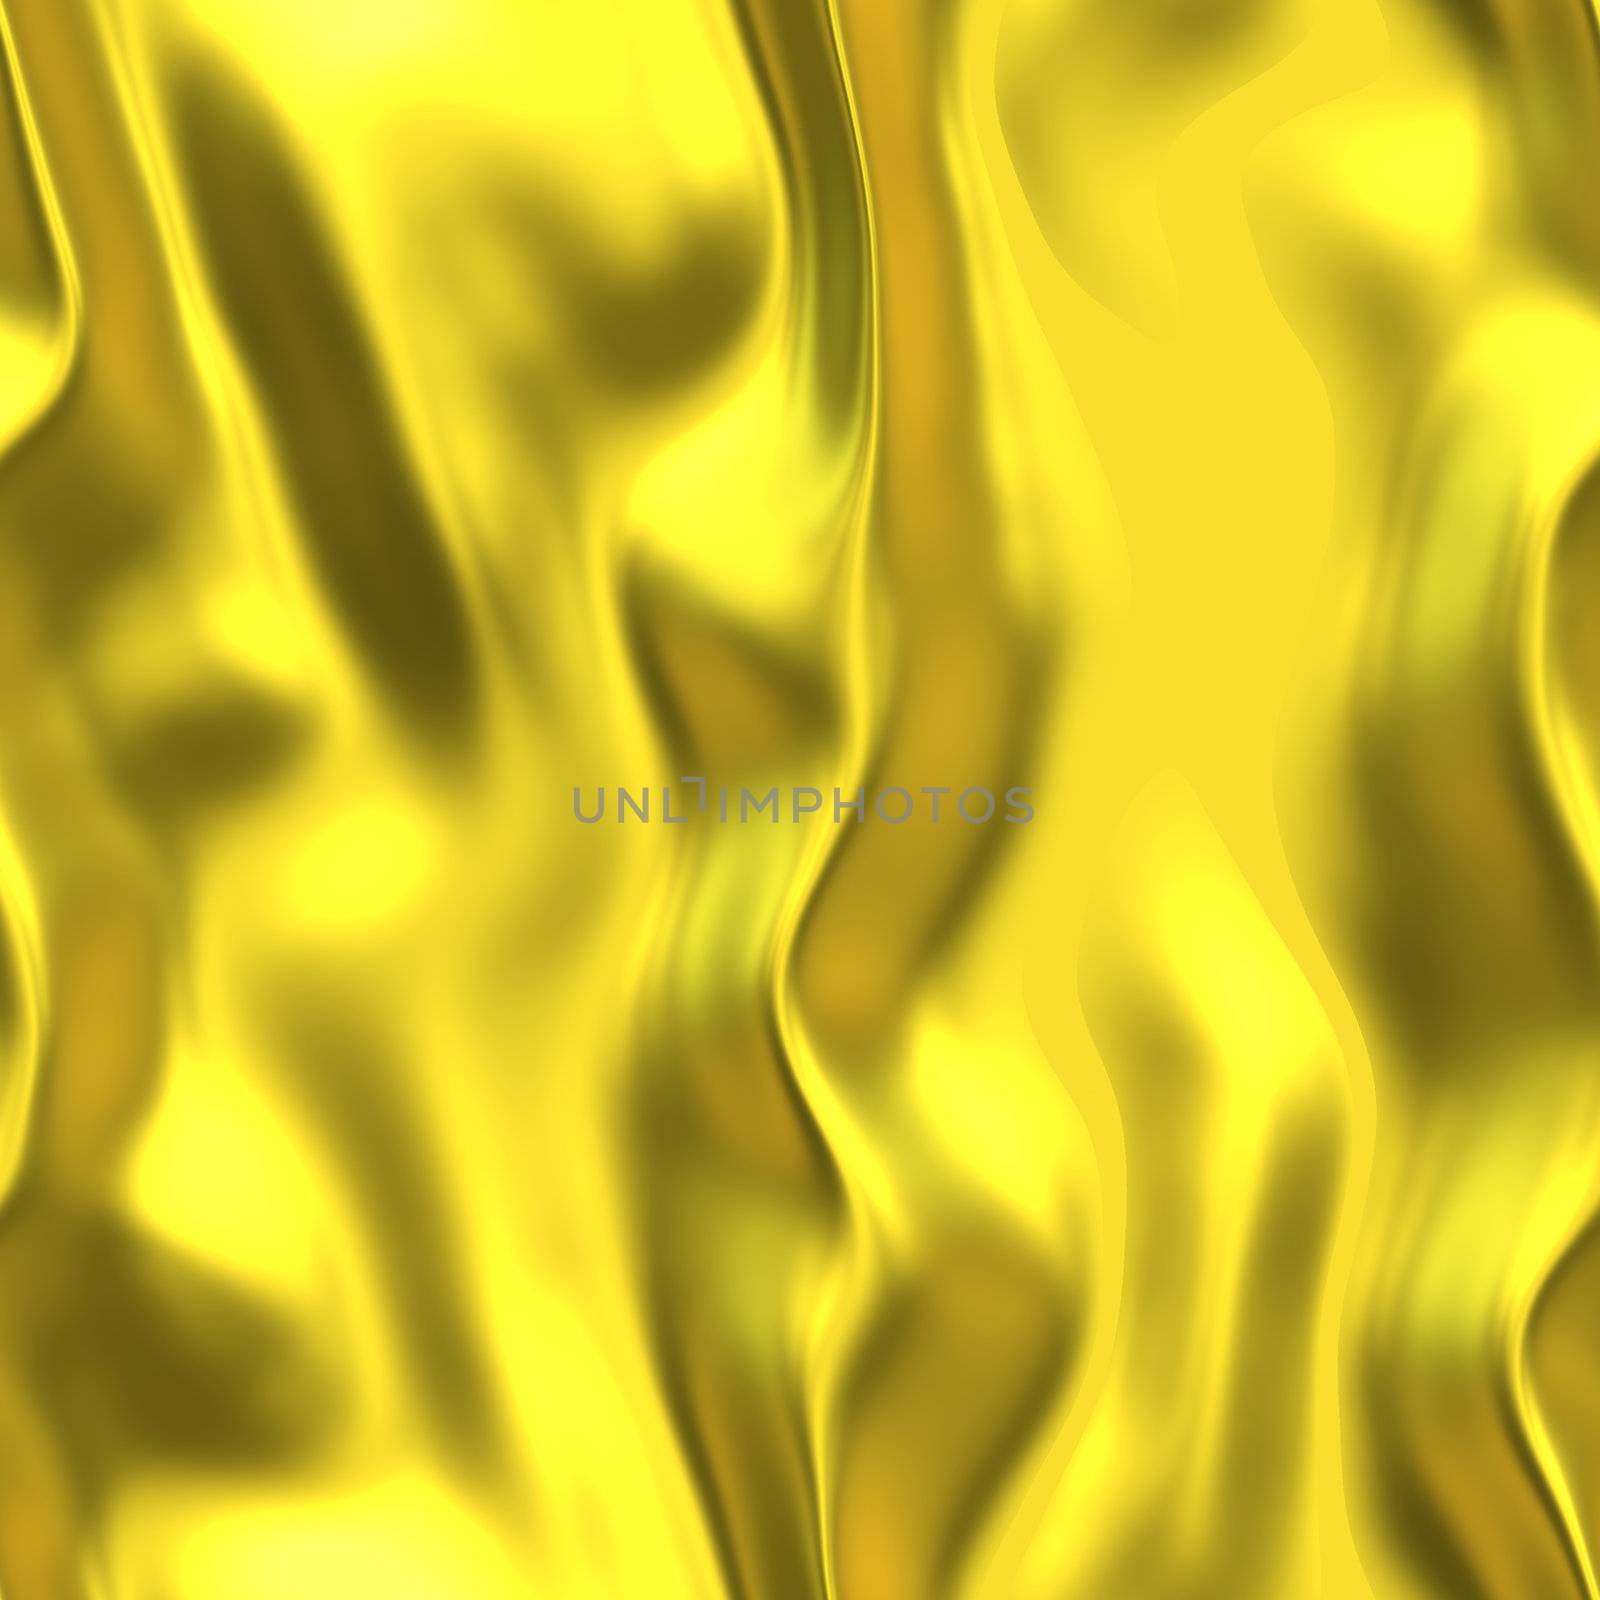 elegant golden satin or silk background, very smooth and will tile seamlessly as a pattern